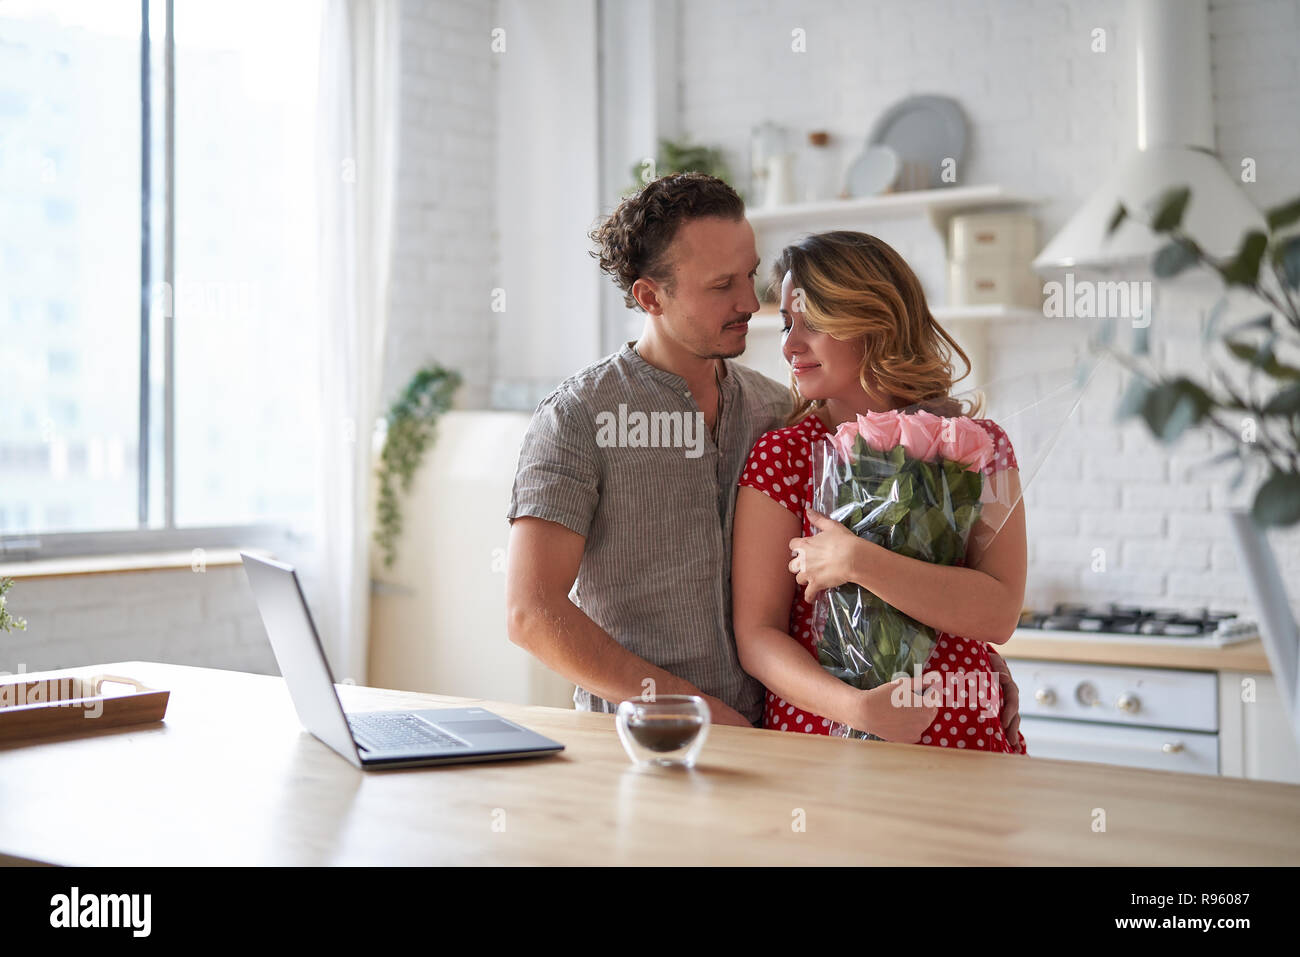 Surprise. Beautiful romantic couple in kitchen. Young man is presenting flowers to his beloved. Feel of happiness. Stock Photo